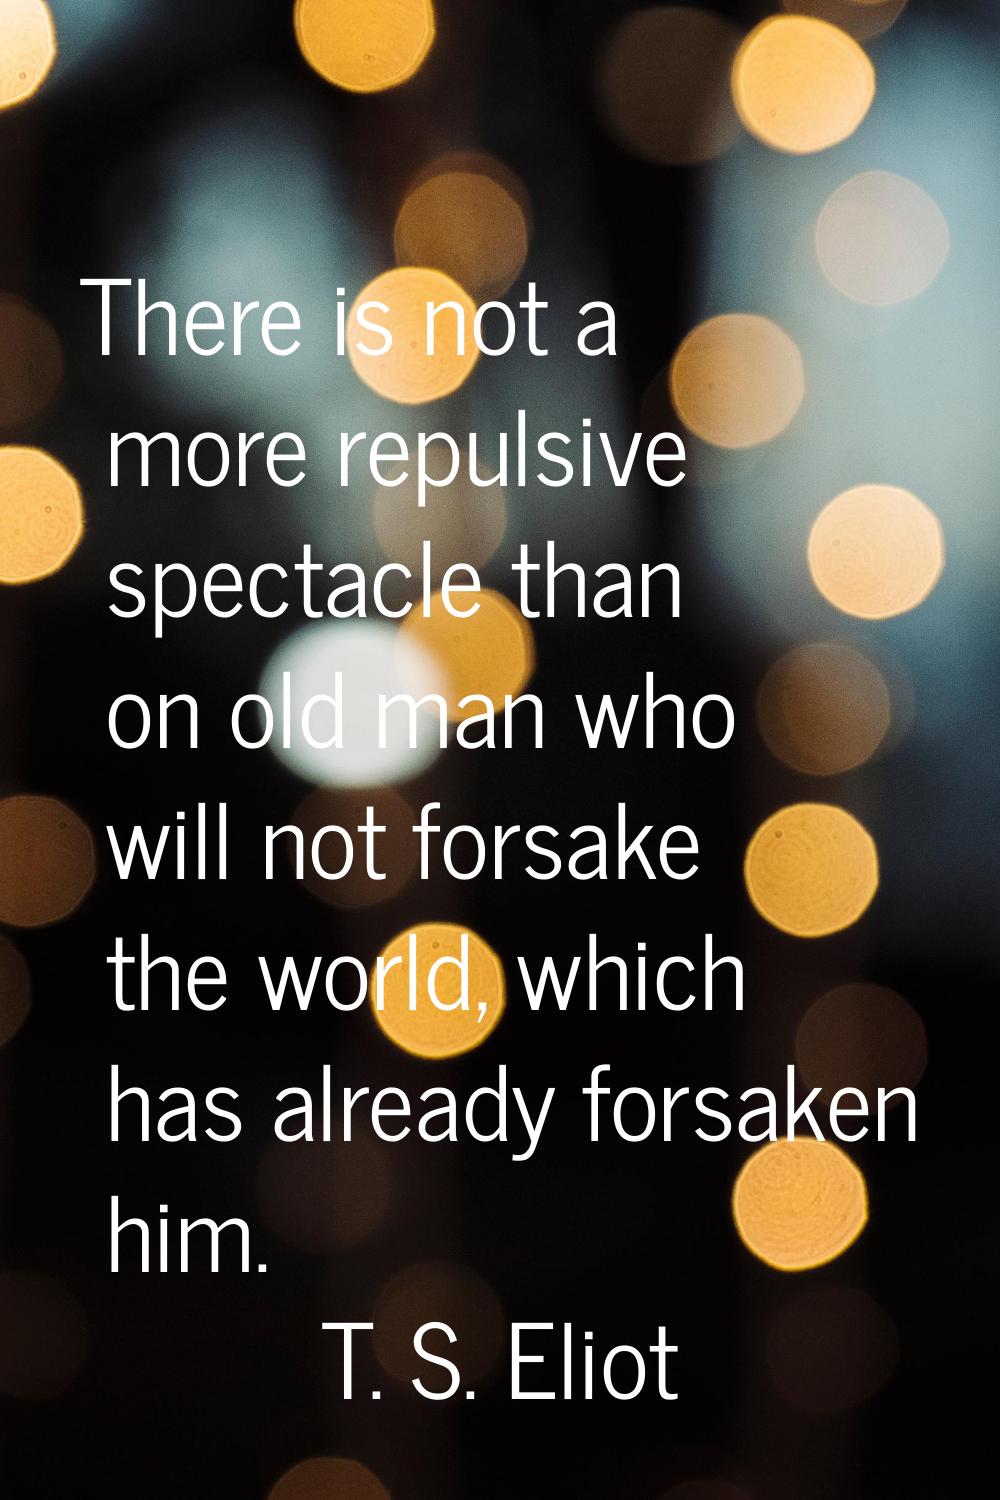 There is not a more repulsive spectacle than on old man who will not forsake the world, which has a